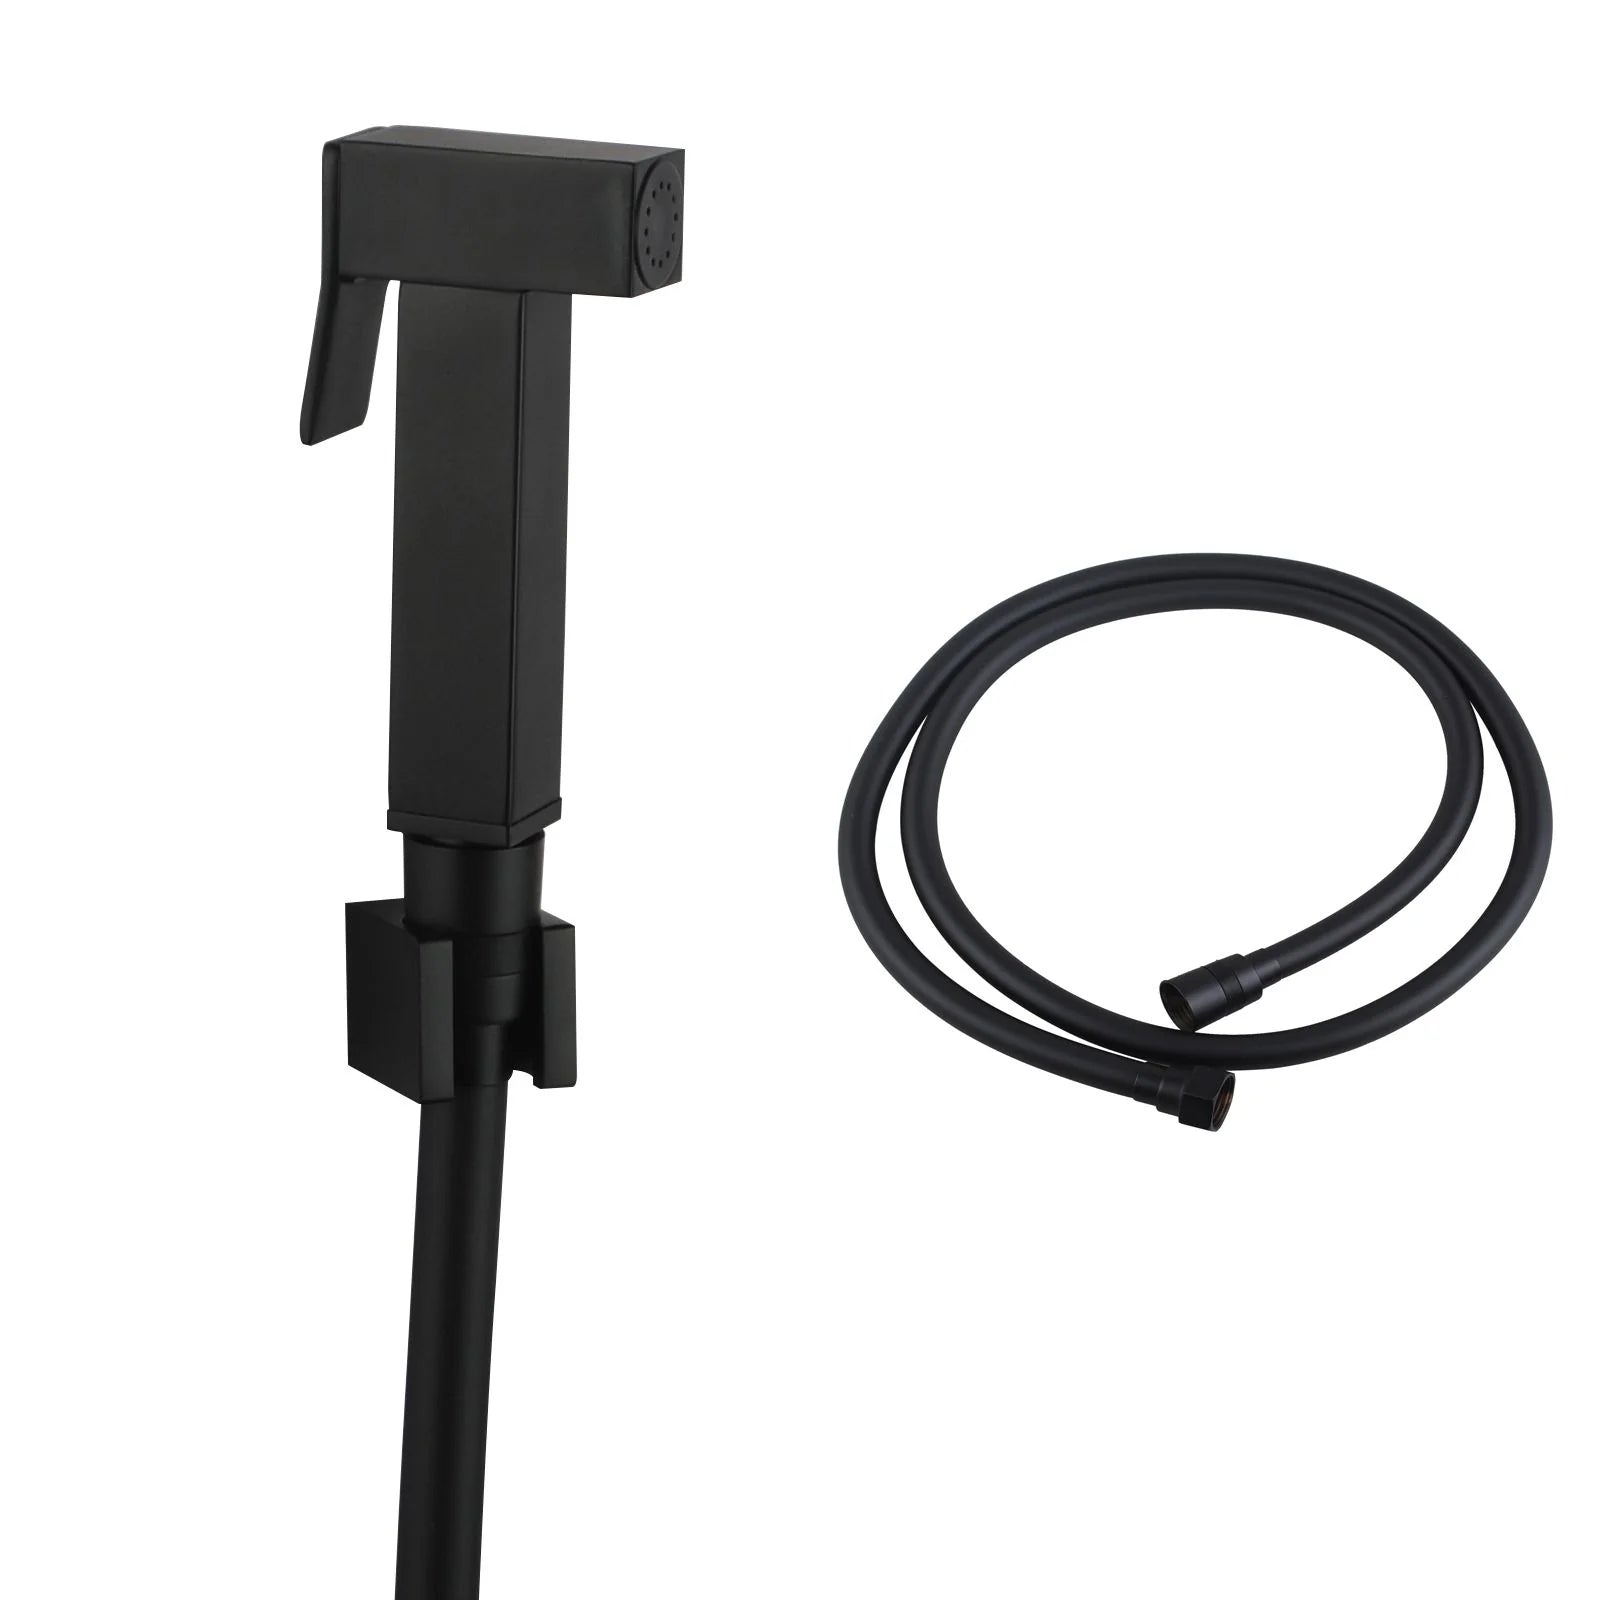 Square Brass Bidet Spray Kit with 1.2m PVC Hose: Compact and Durable-OX0009E.SH-Black